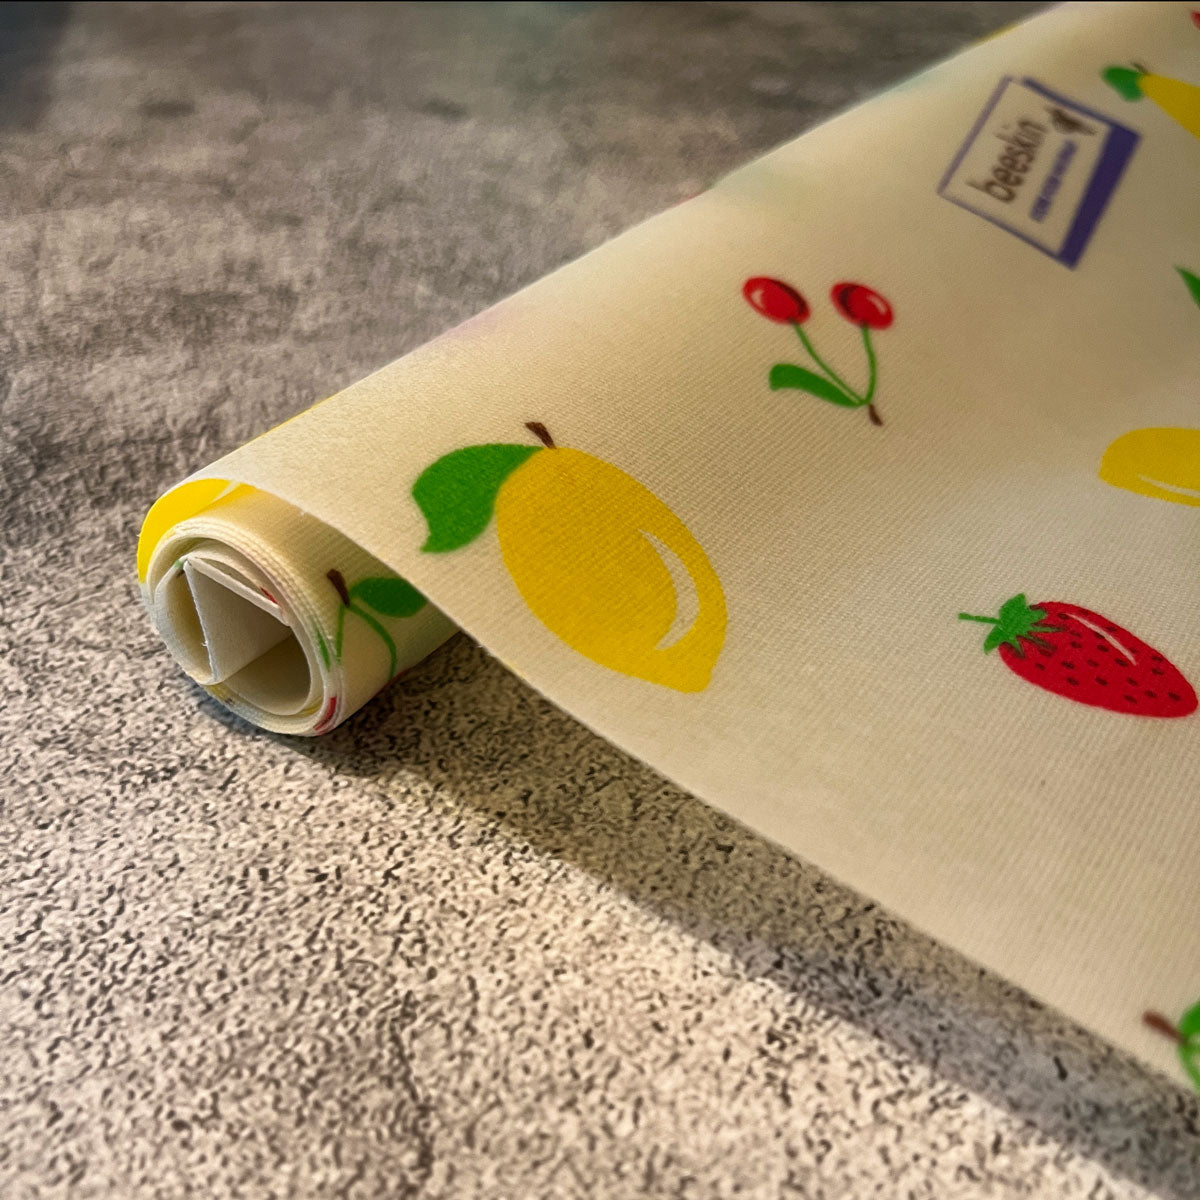 beeskin beeswax roll with fruits such as lemon, strawberry, cherry and bee ski. logo